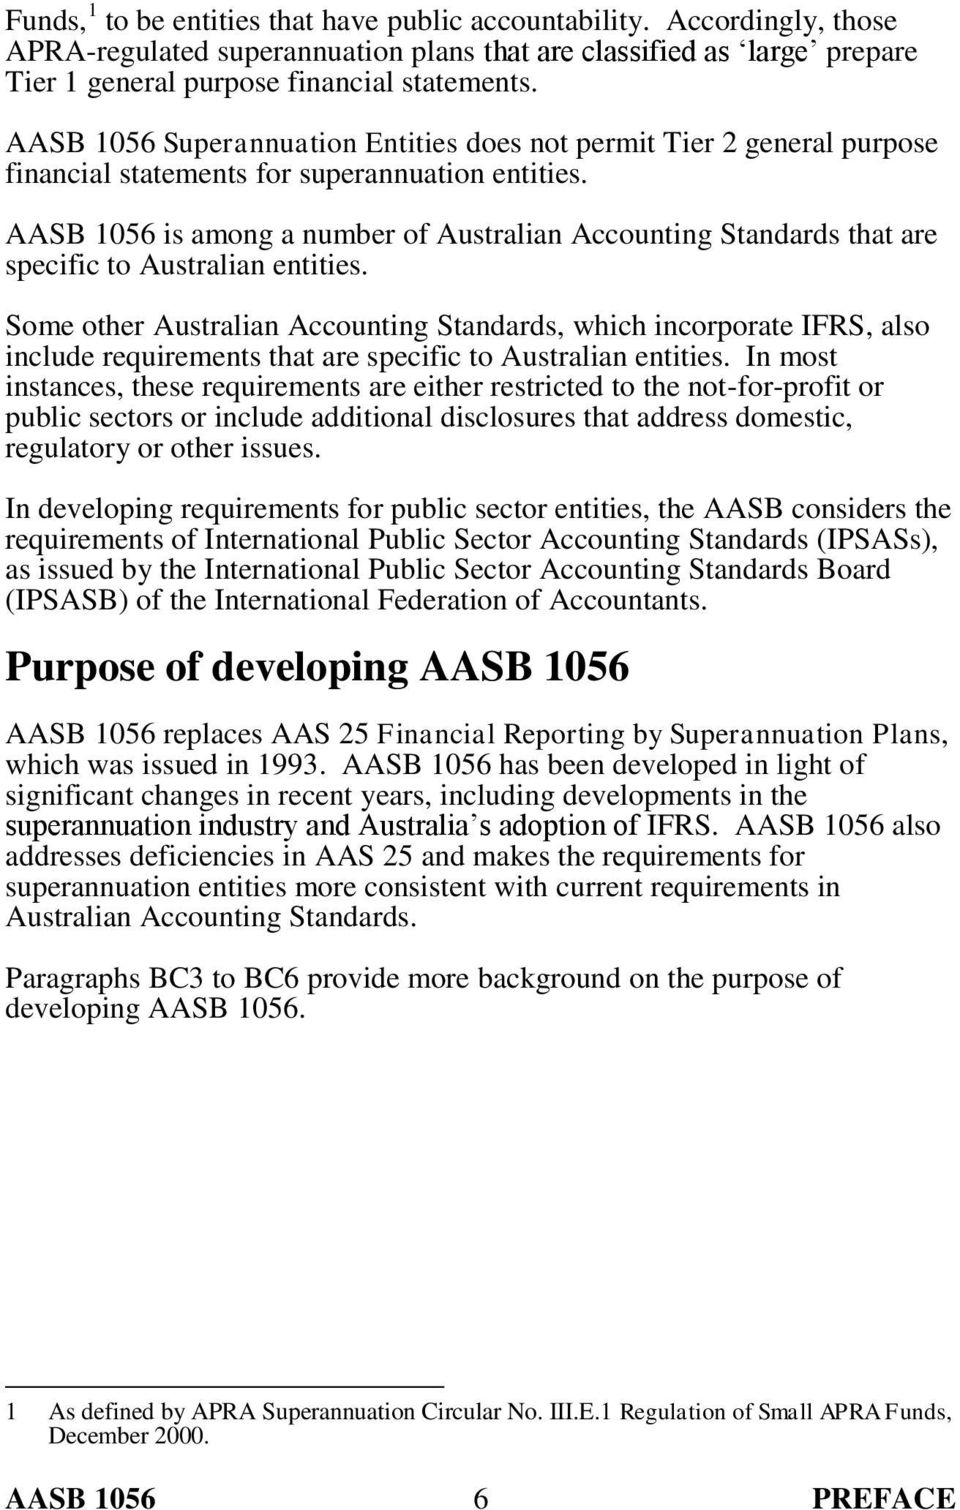 AASB 1056 is among a number of Australian Accounting Standards that are specific to Australian entities.